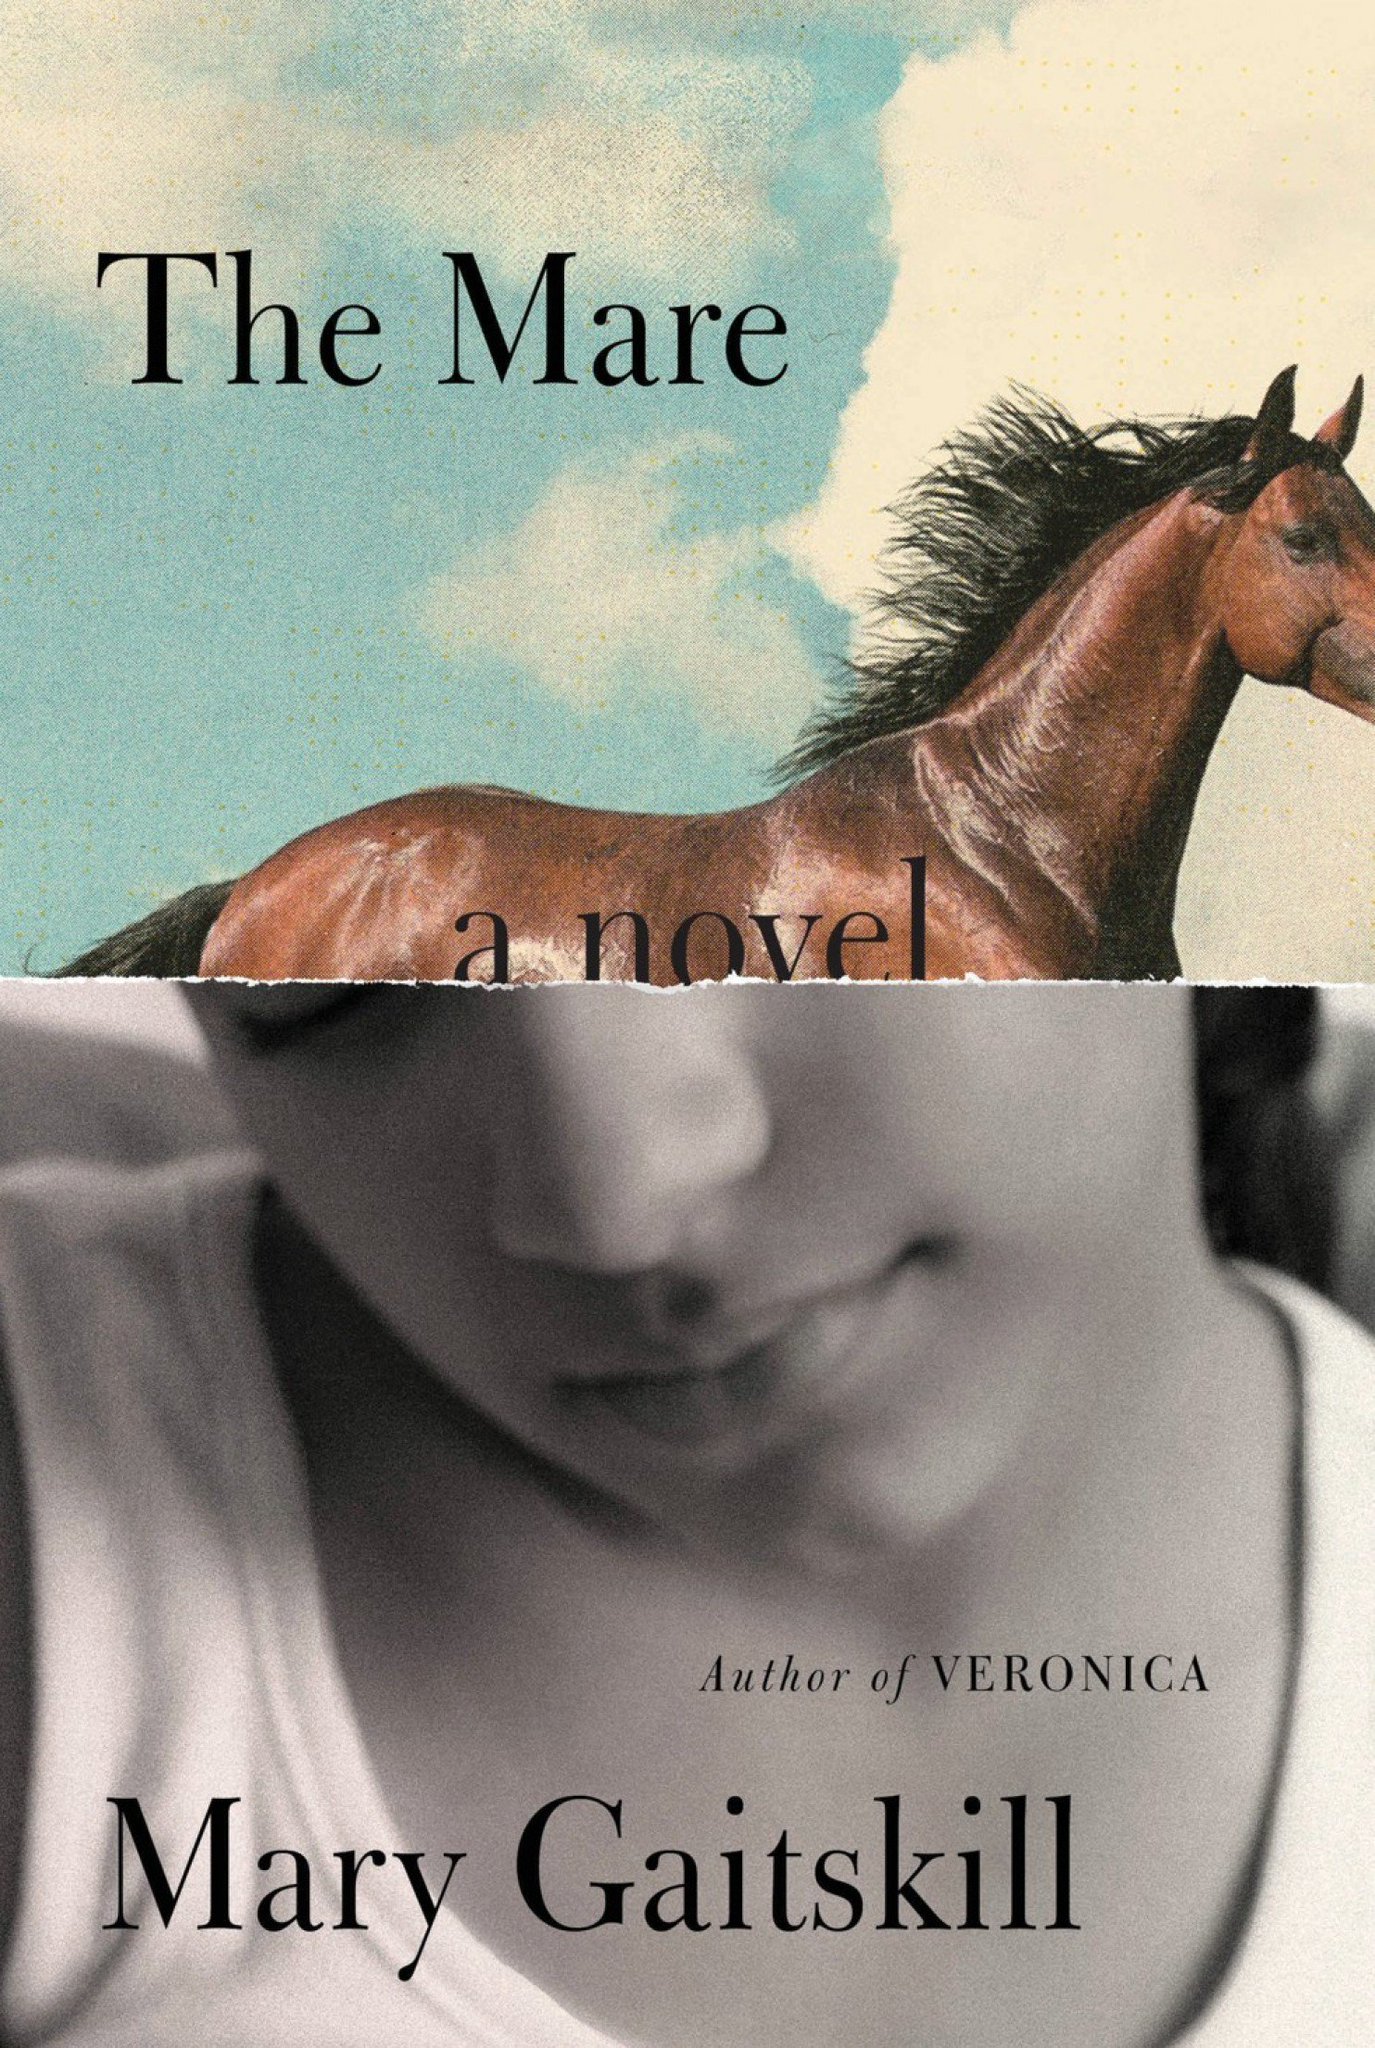 Happy birthday to Mary Gaitskill, who\s just published a powerful novel called THE MARE:  